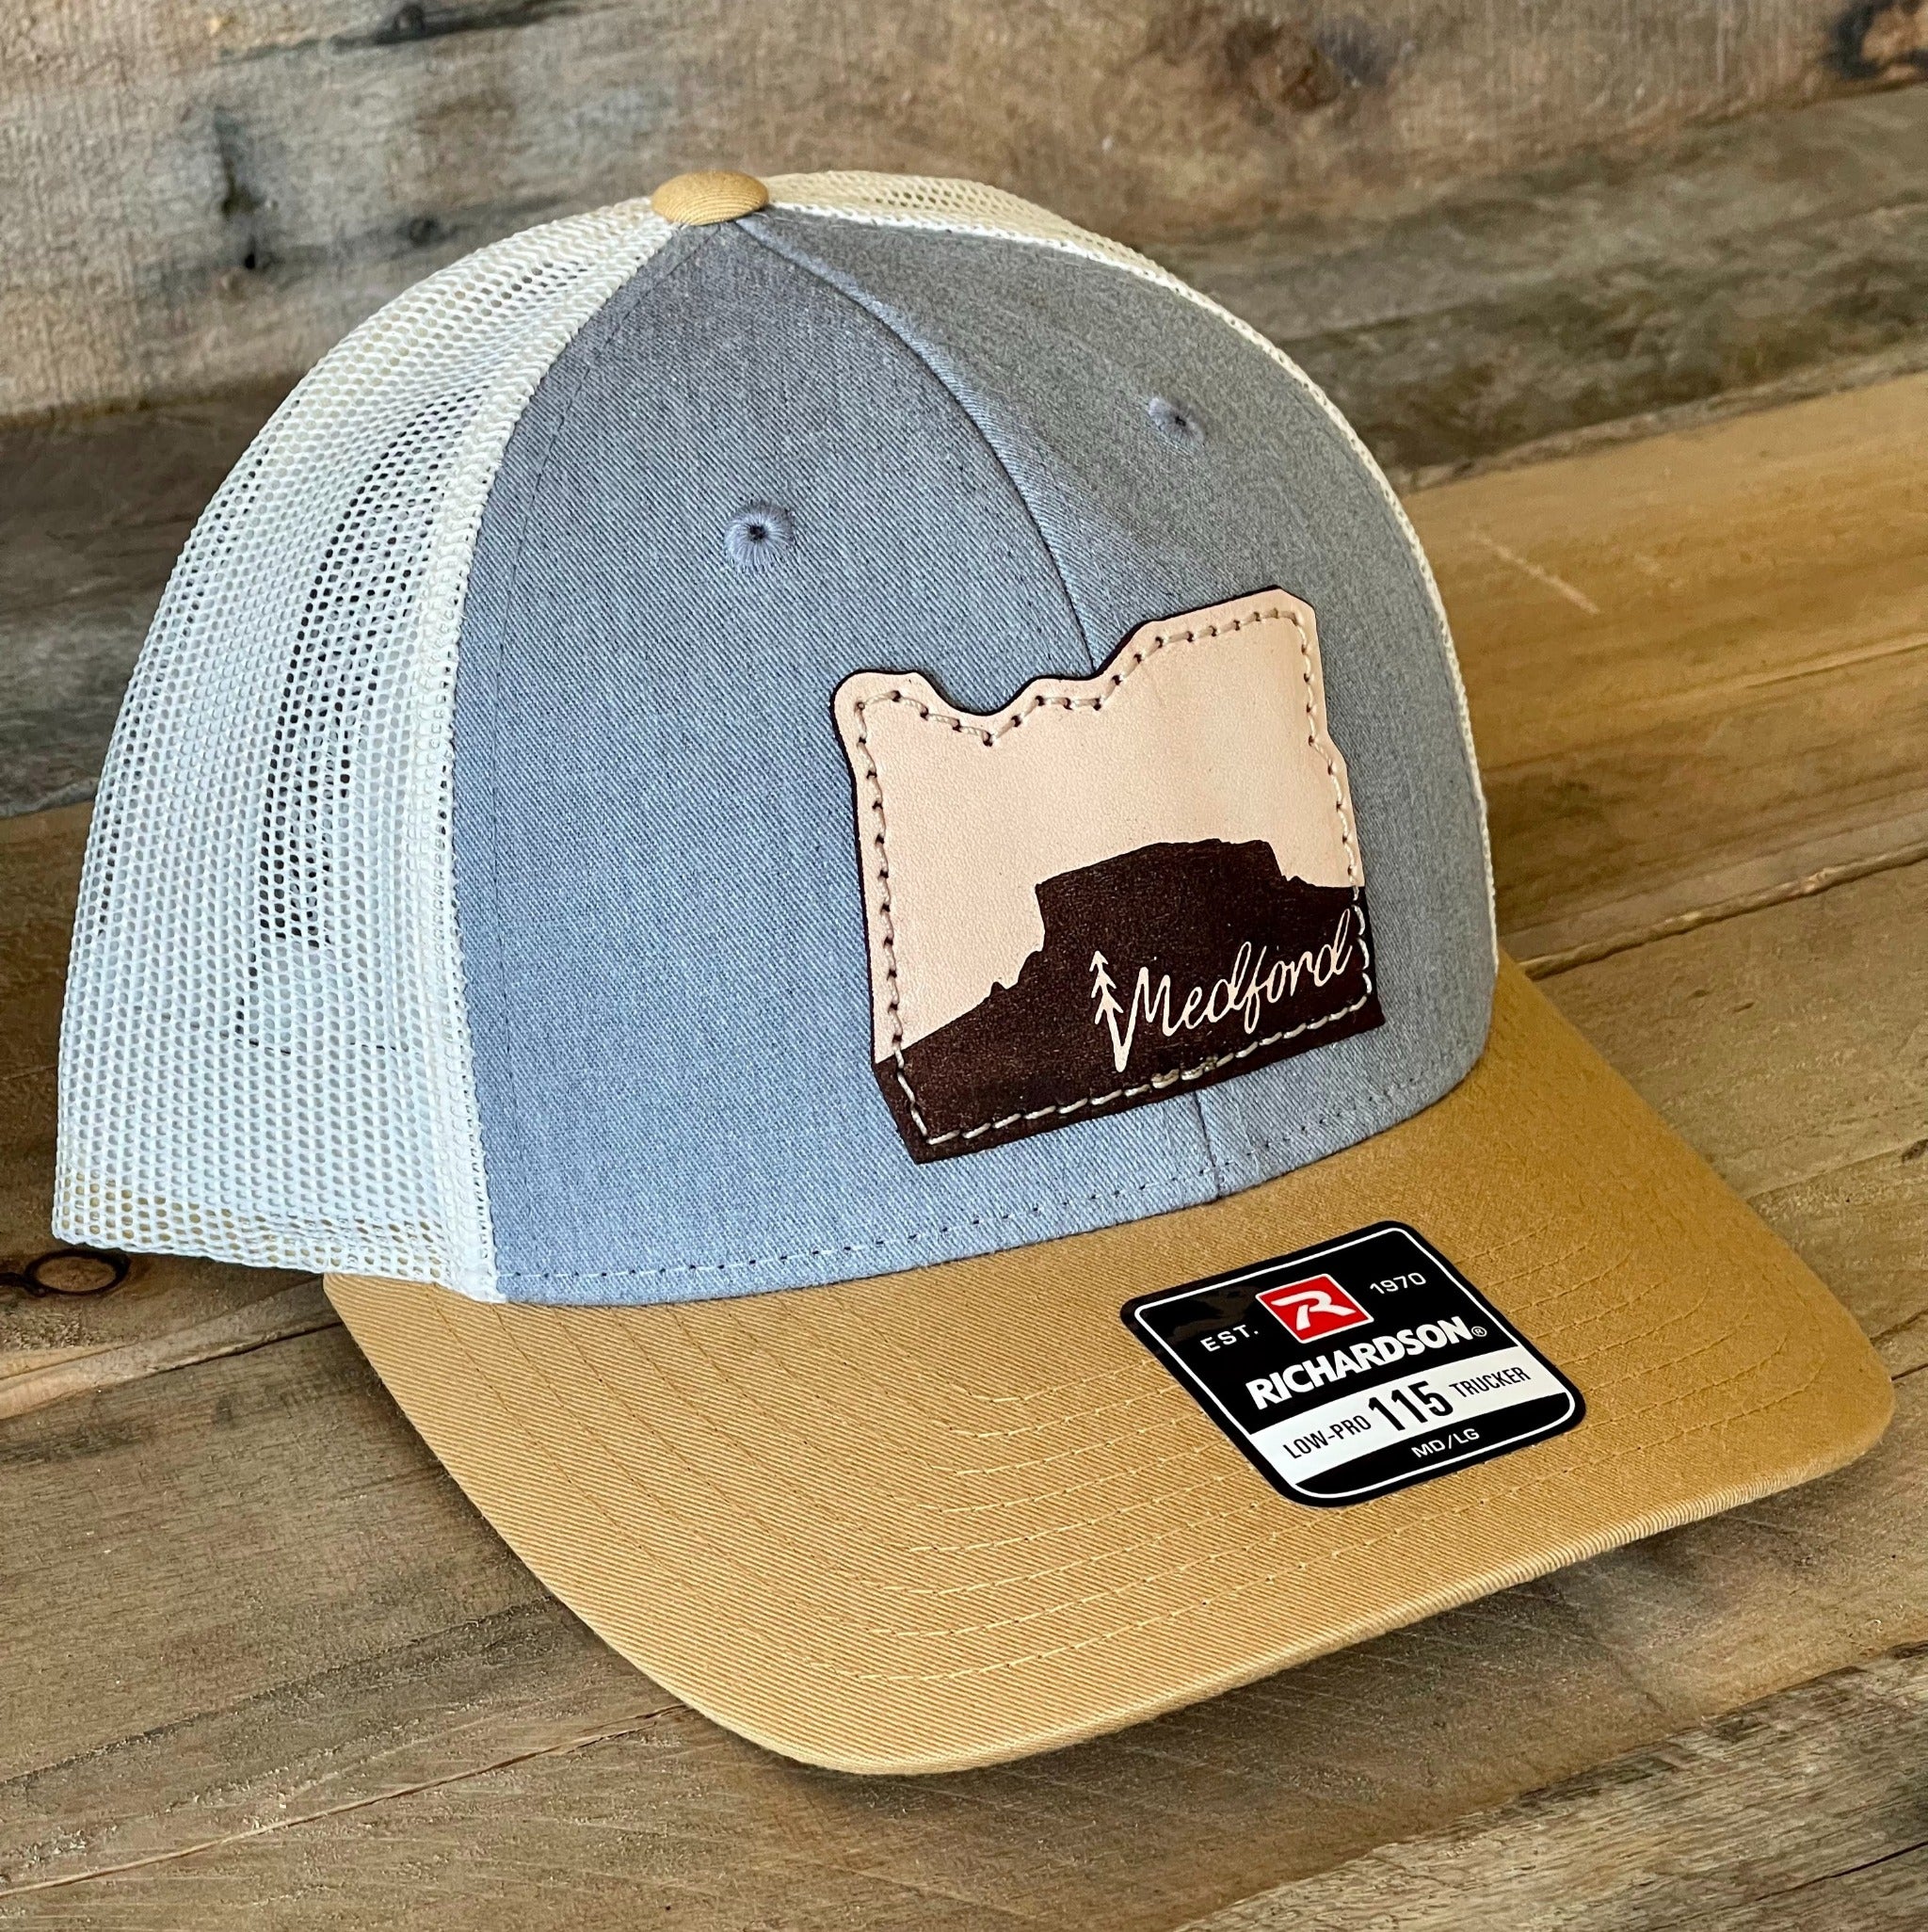 Travel Medford leather patch hat